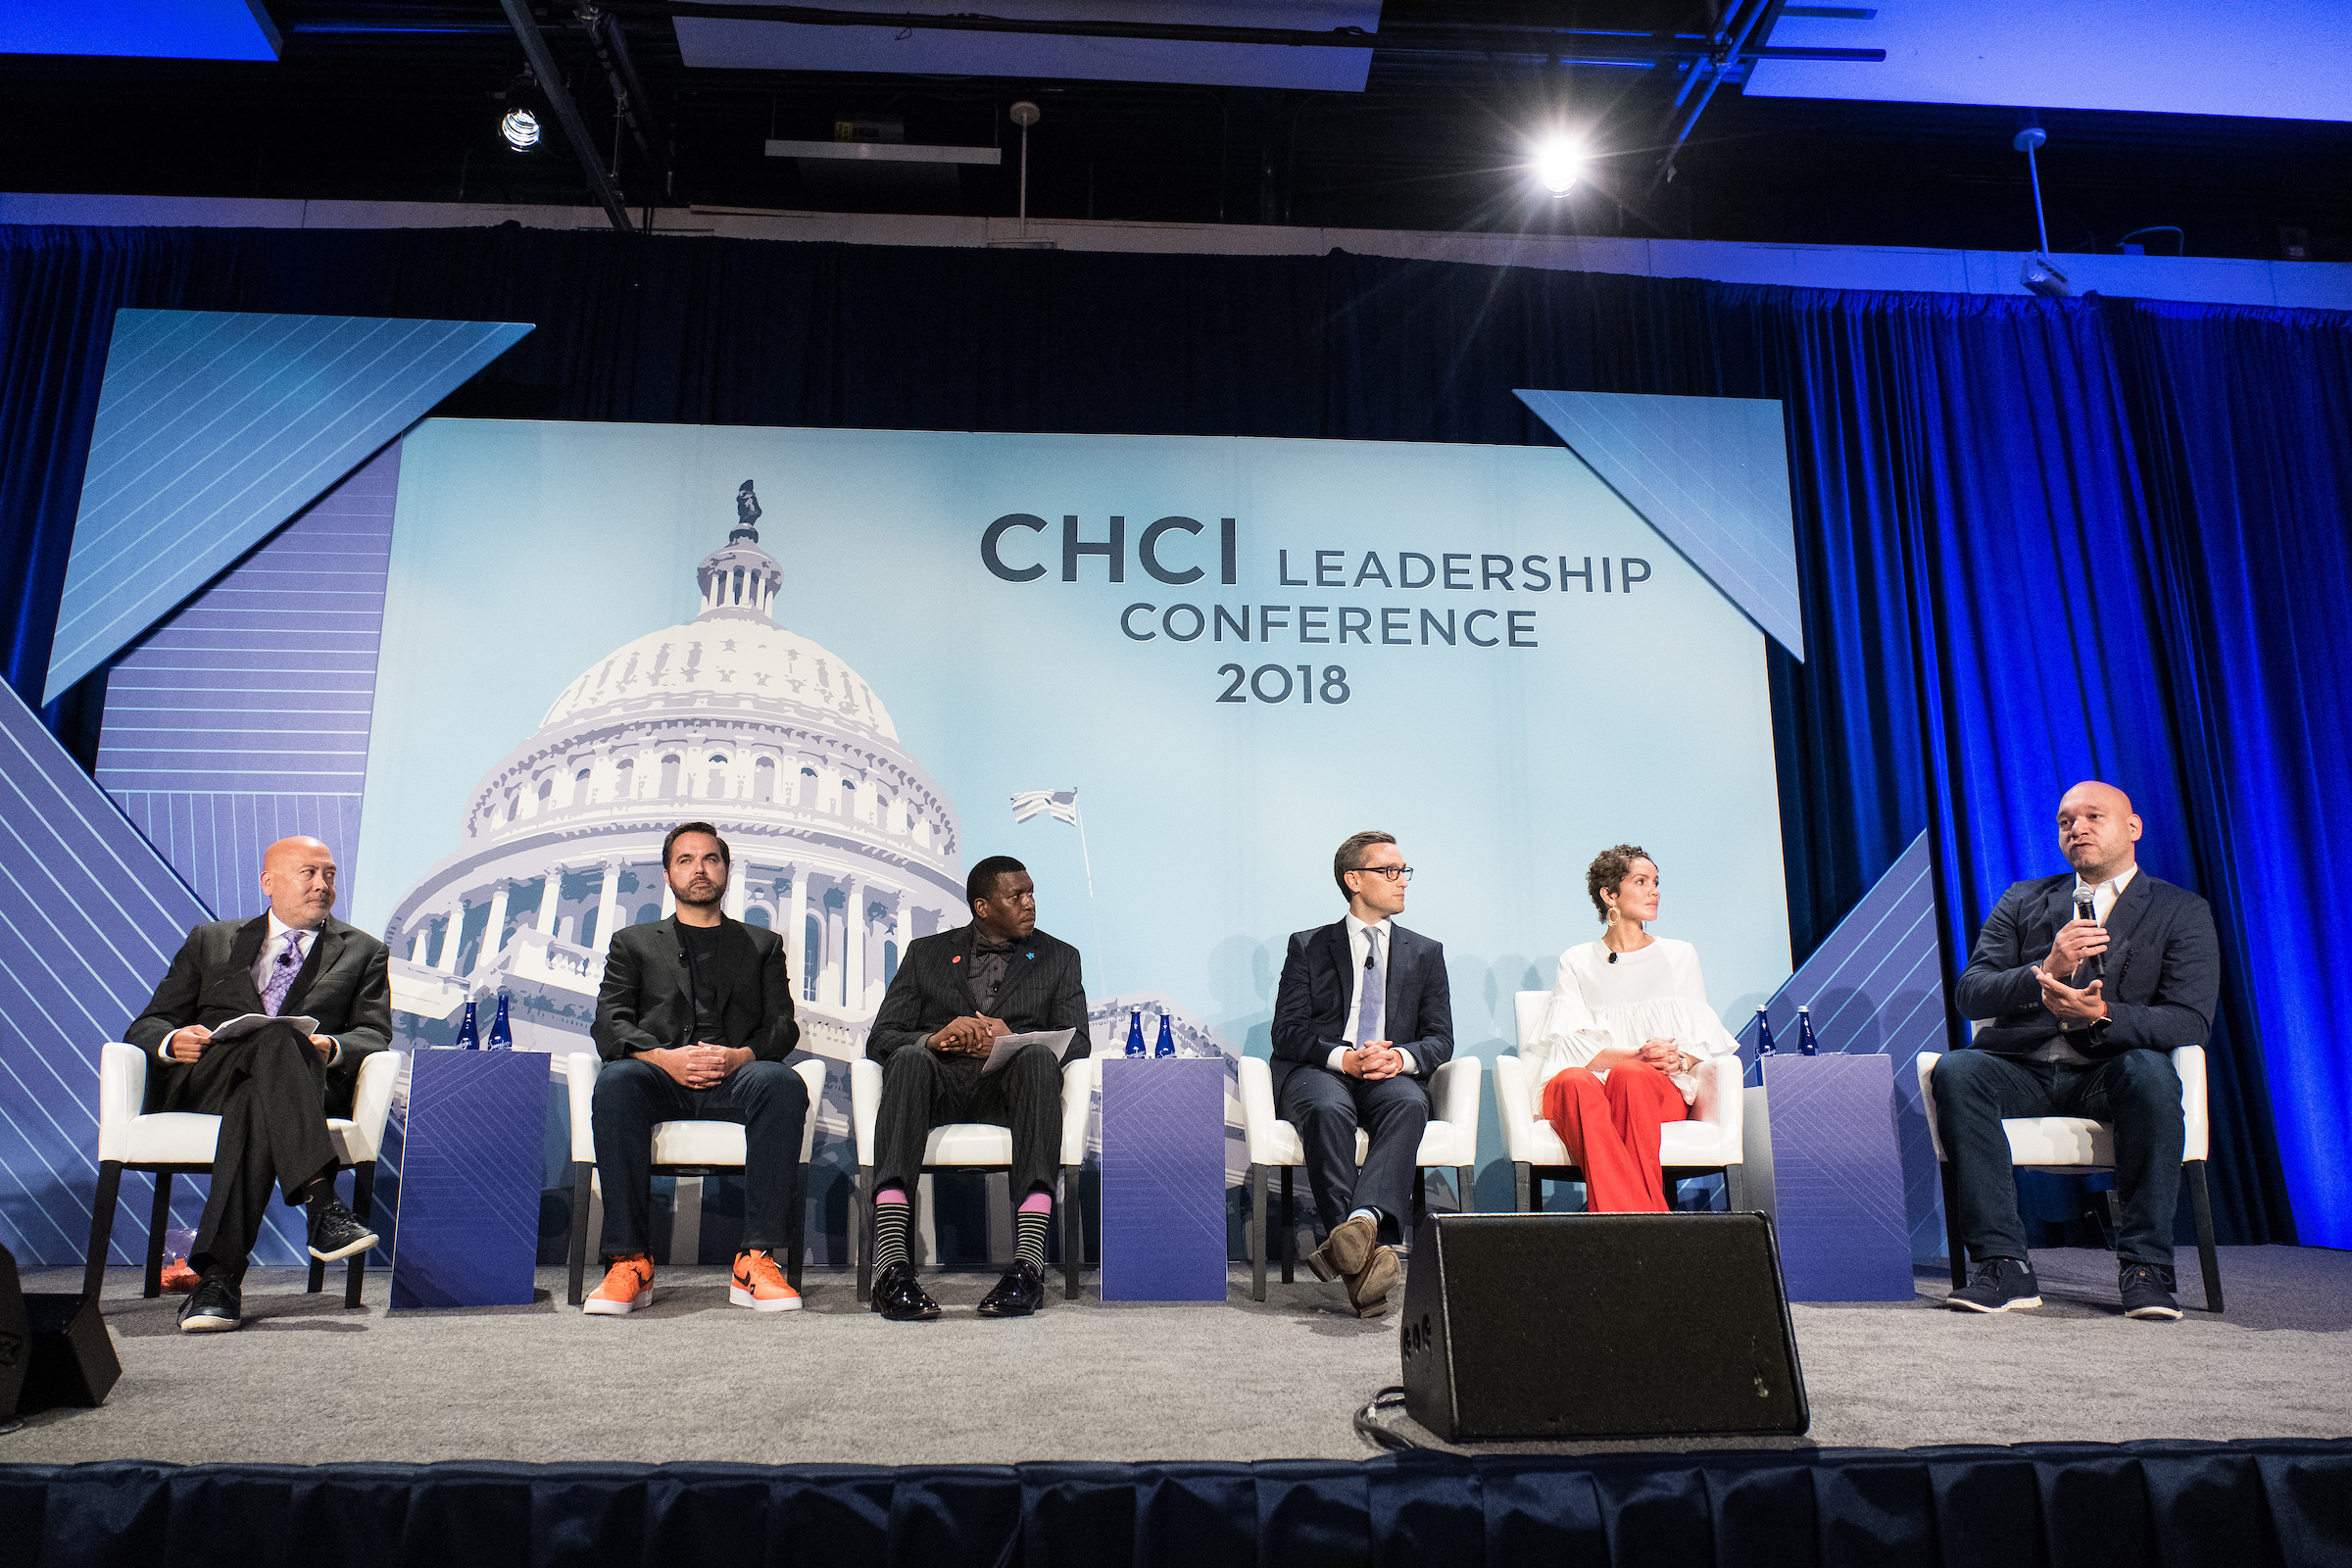 CHCI Leadership Conference on September 12th, 2018.